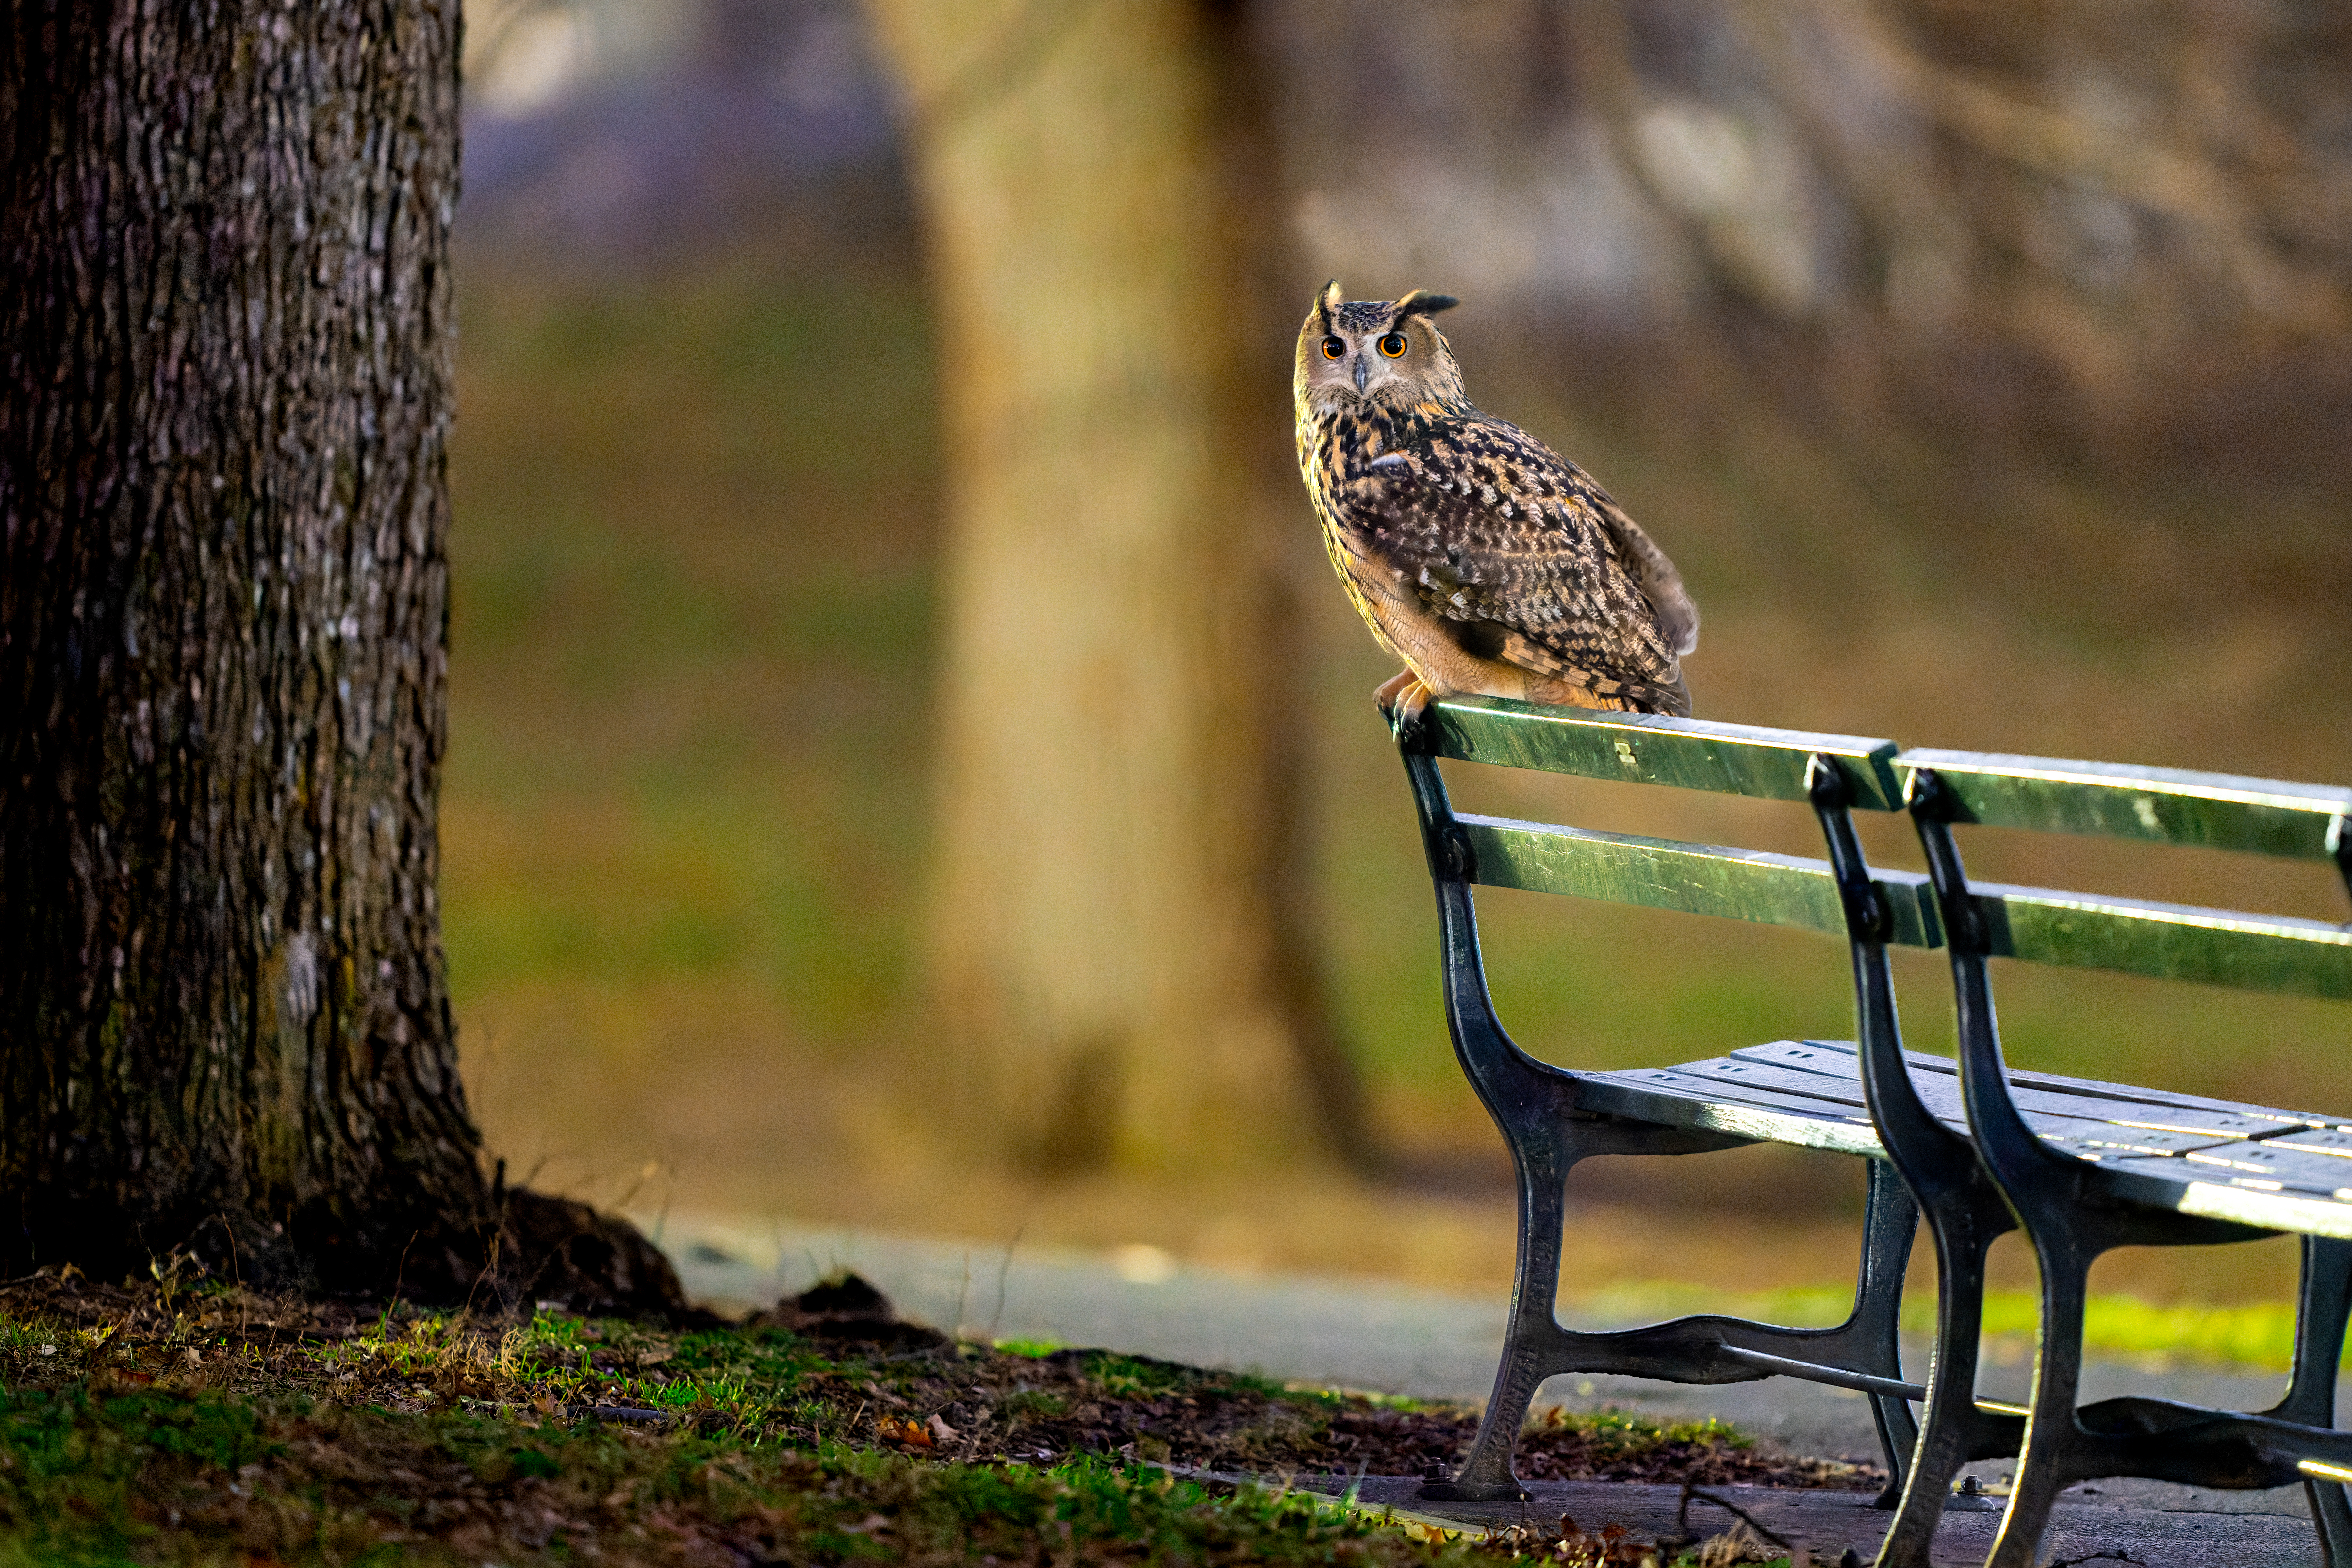 An owl pauses on a bench.